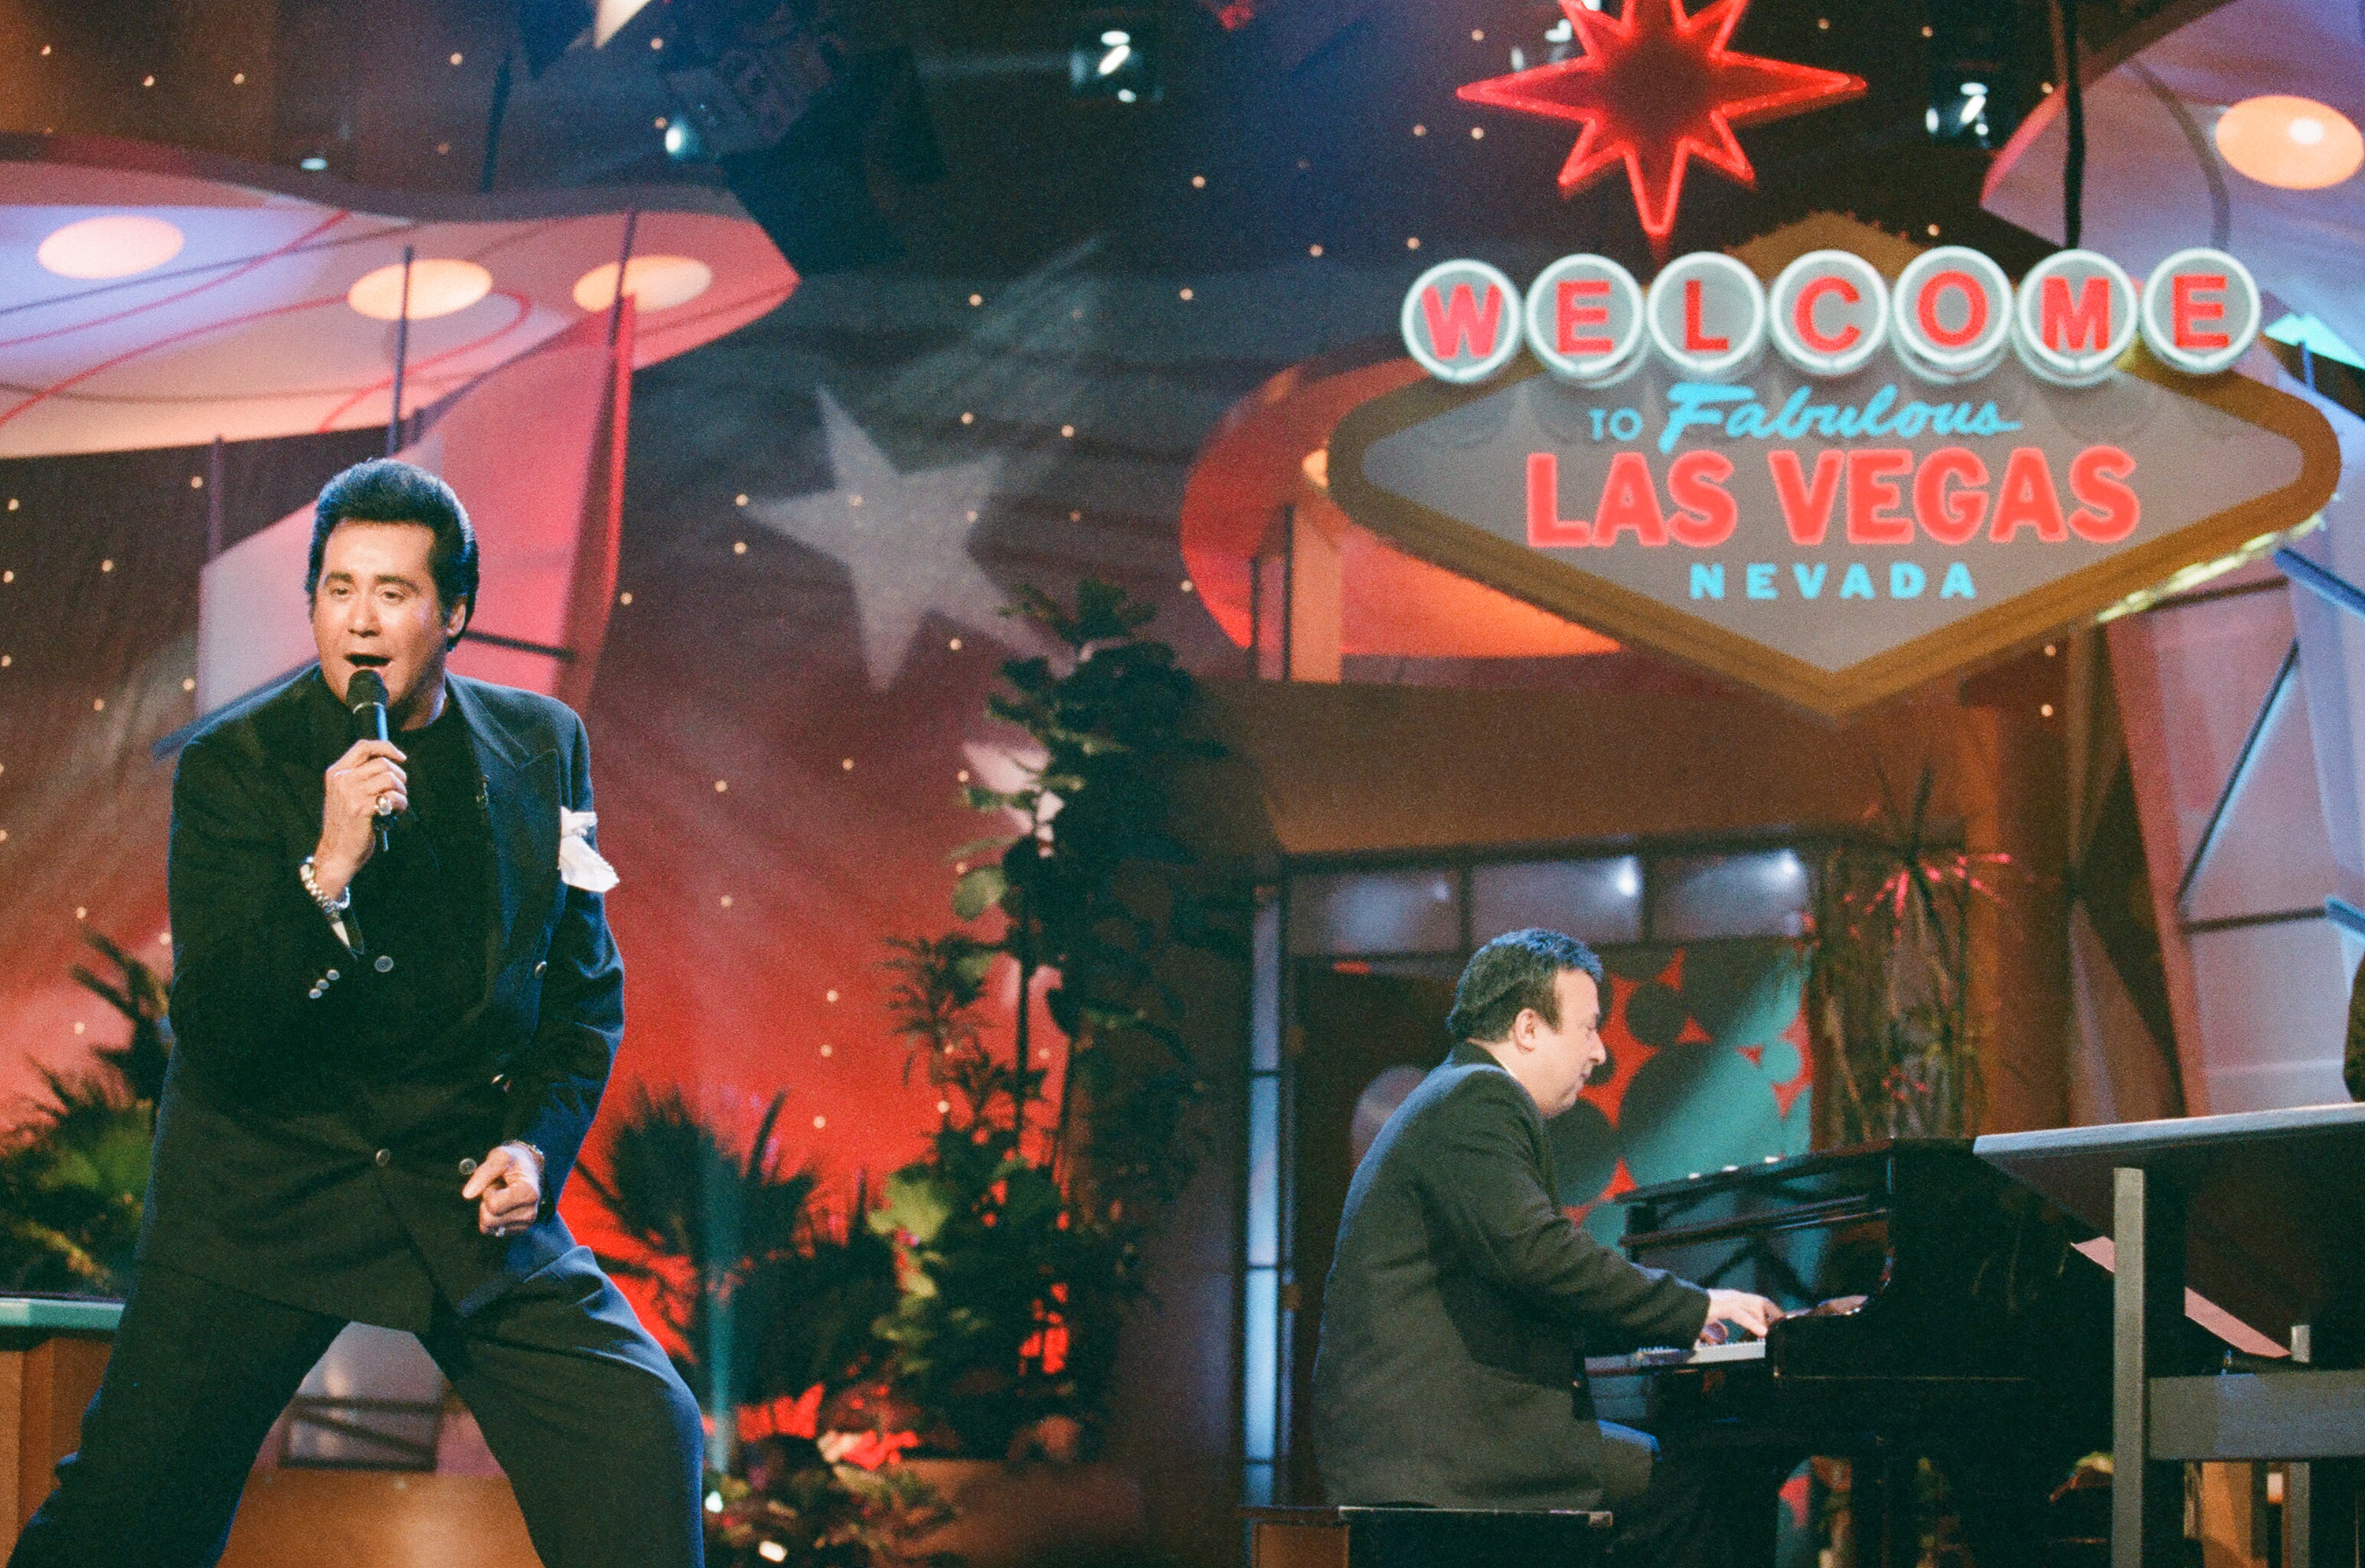 Wayne Newton performs during "The Tonight Show with Jay Leno" on February 3, 1997 | Source: Getty Images